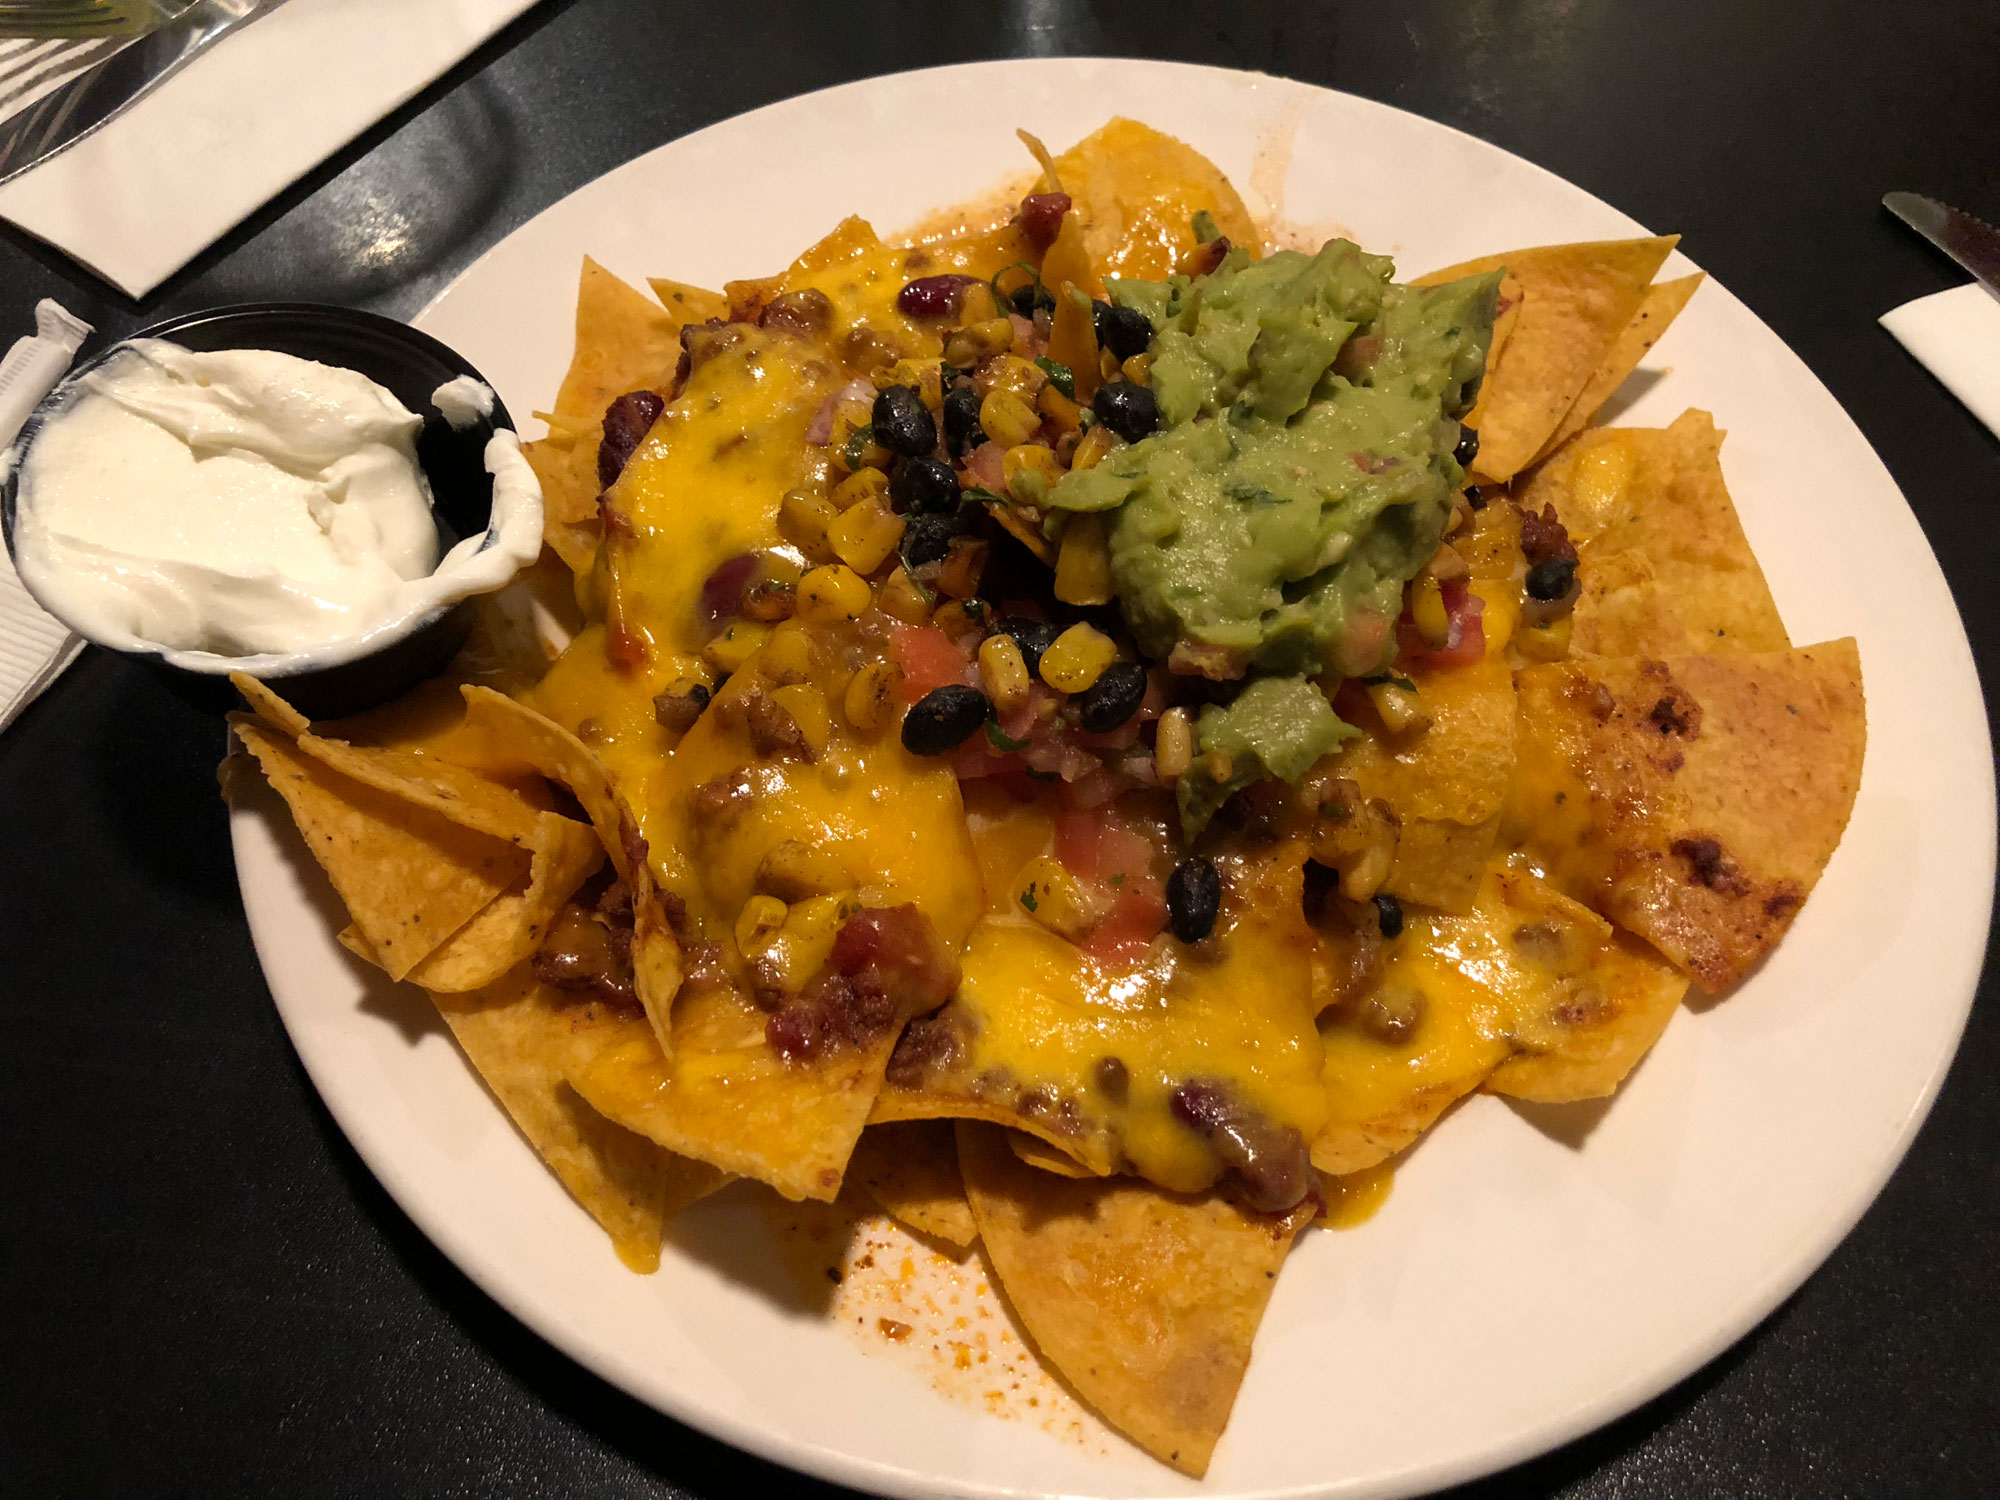 Photograph of a plate of nachos. The photo shows a round white plate on a black surface. On the plate are tortilla chips covered with melted cheese, meat, corn kernels, black beans, and guacamole. A small black container of sour cream is on the edge of the plate next to the chips.